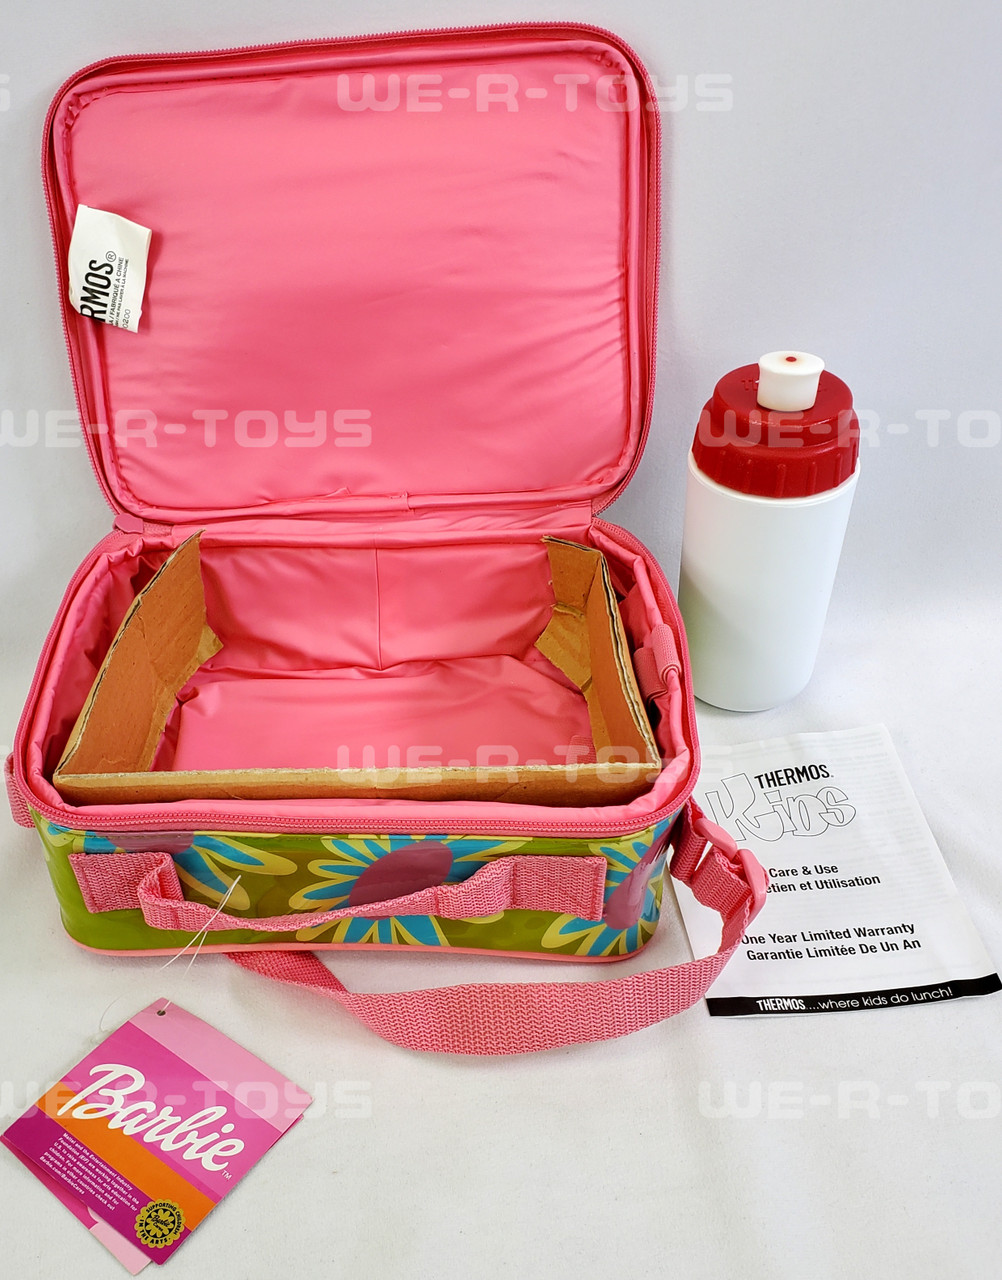 Barbie Thermos Must haves!!! #thermos #thermocups #lunchbags #lunchbox